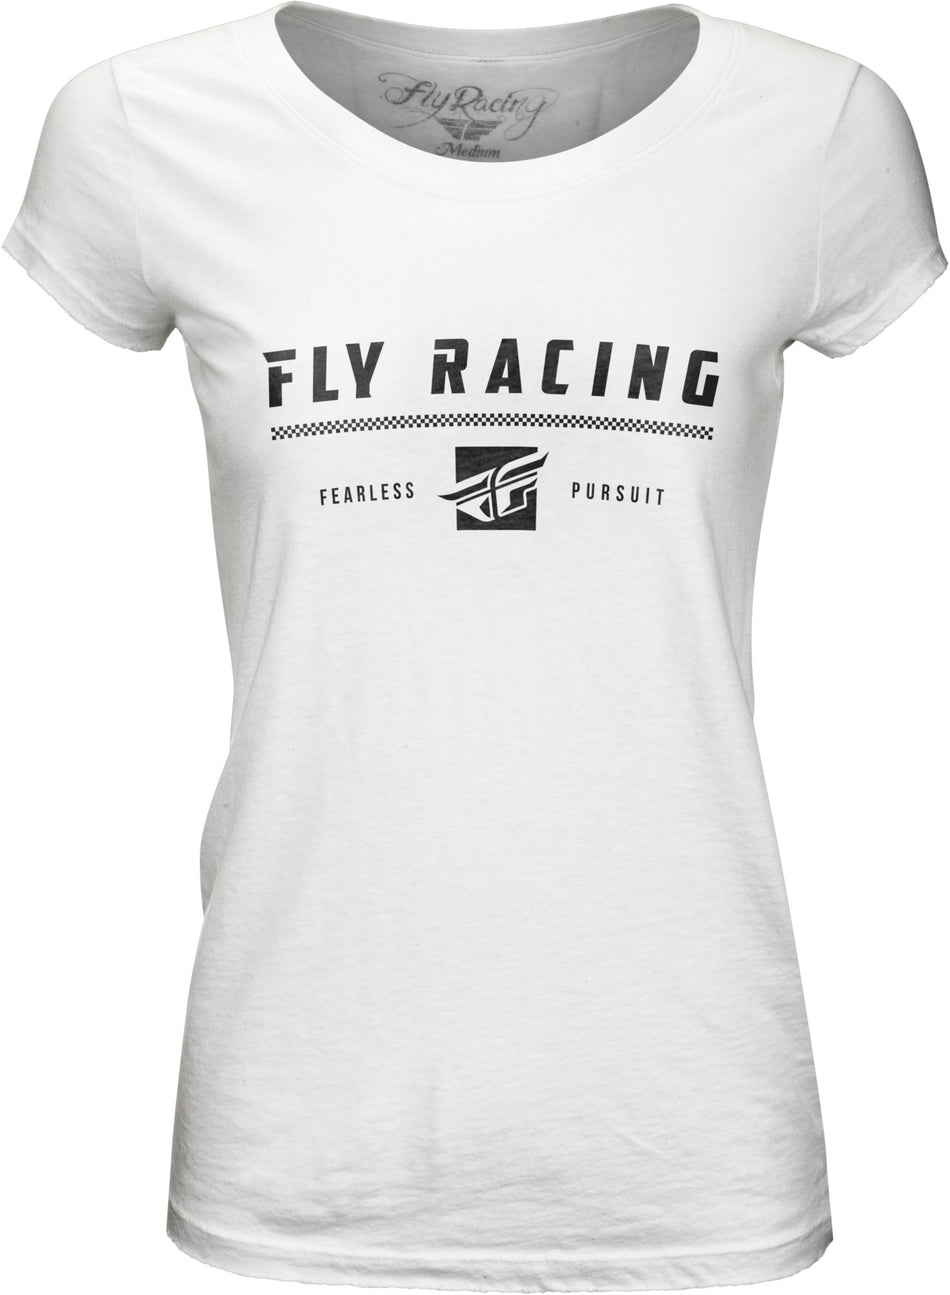 FLY RACING Fly Women's Pursuit Vintage Tee White Md 356-0434M